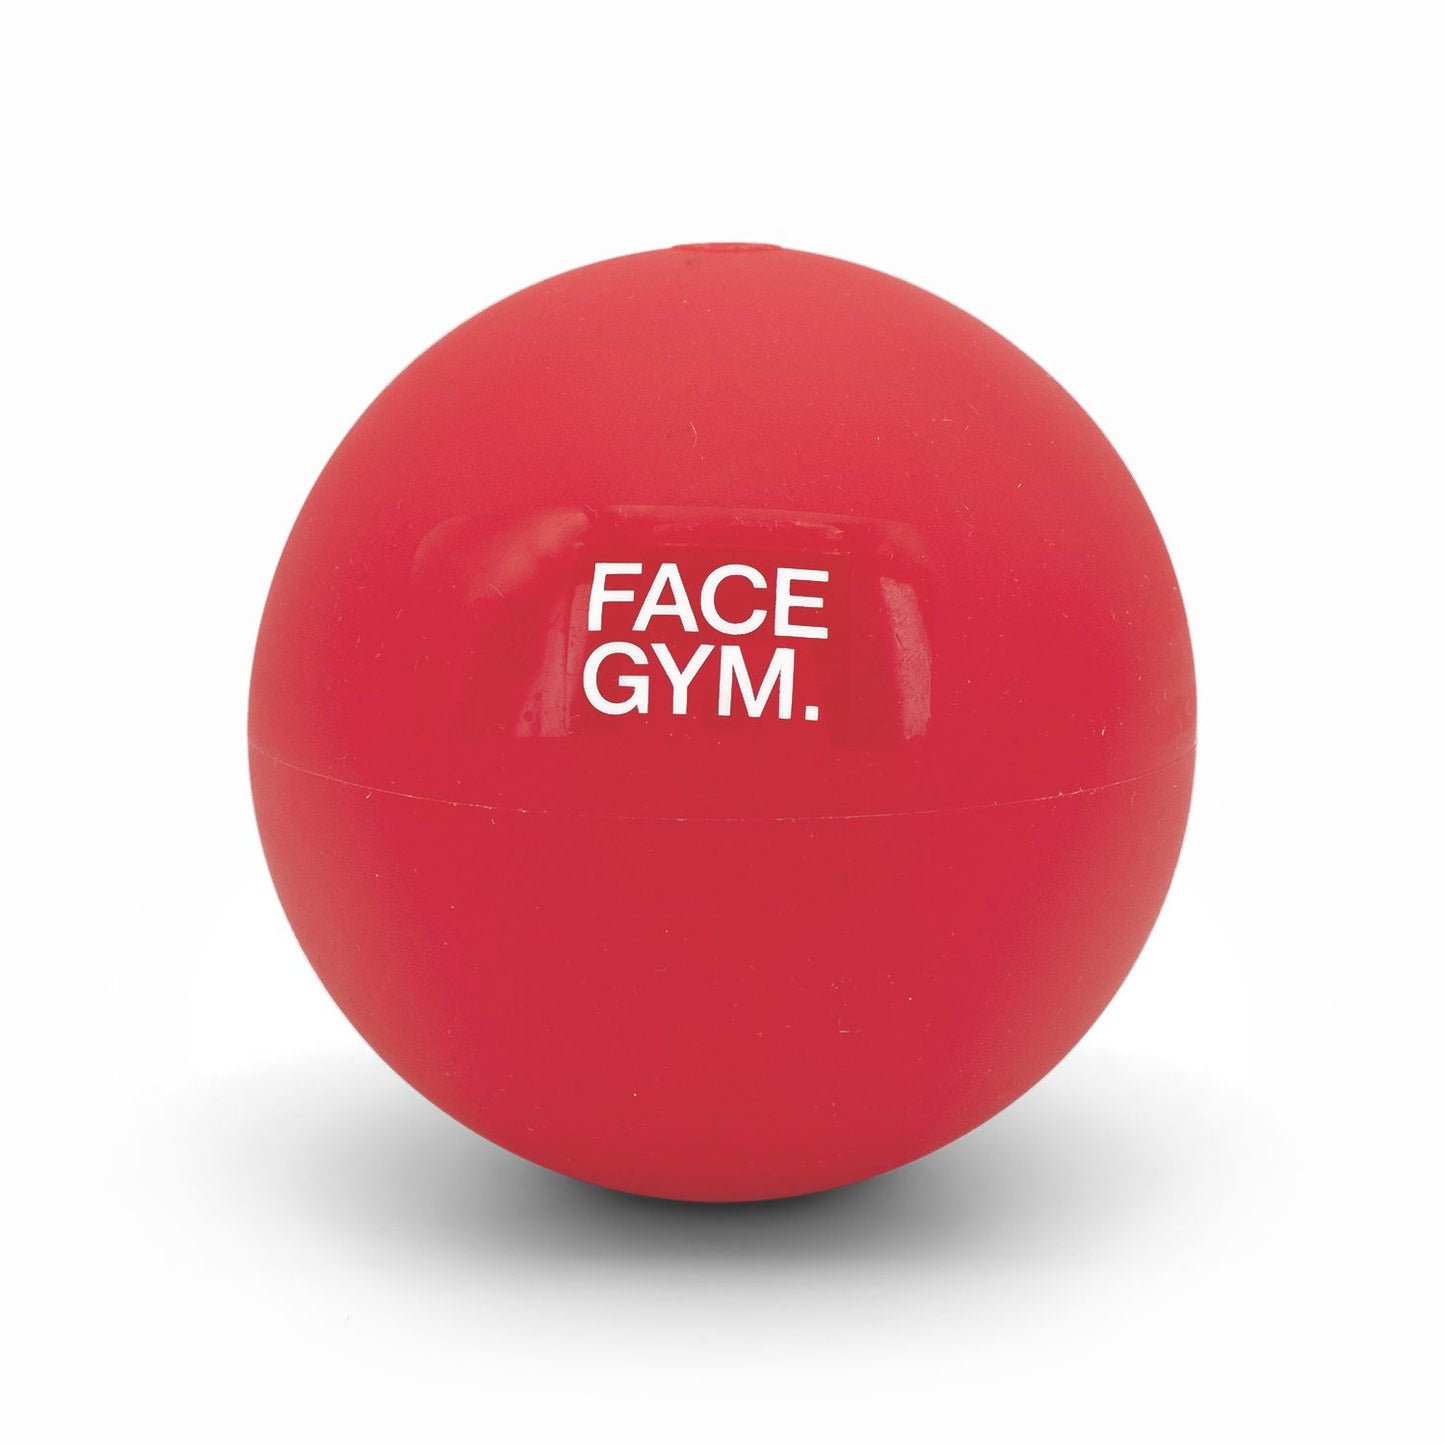 FaceGym Face Ball Red Mini Yoga Ball For Your Face - Imperfect Box